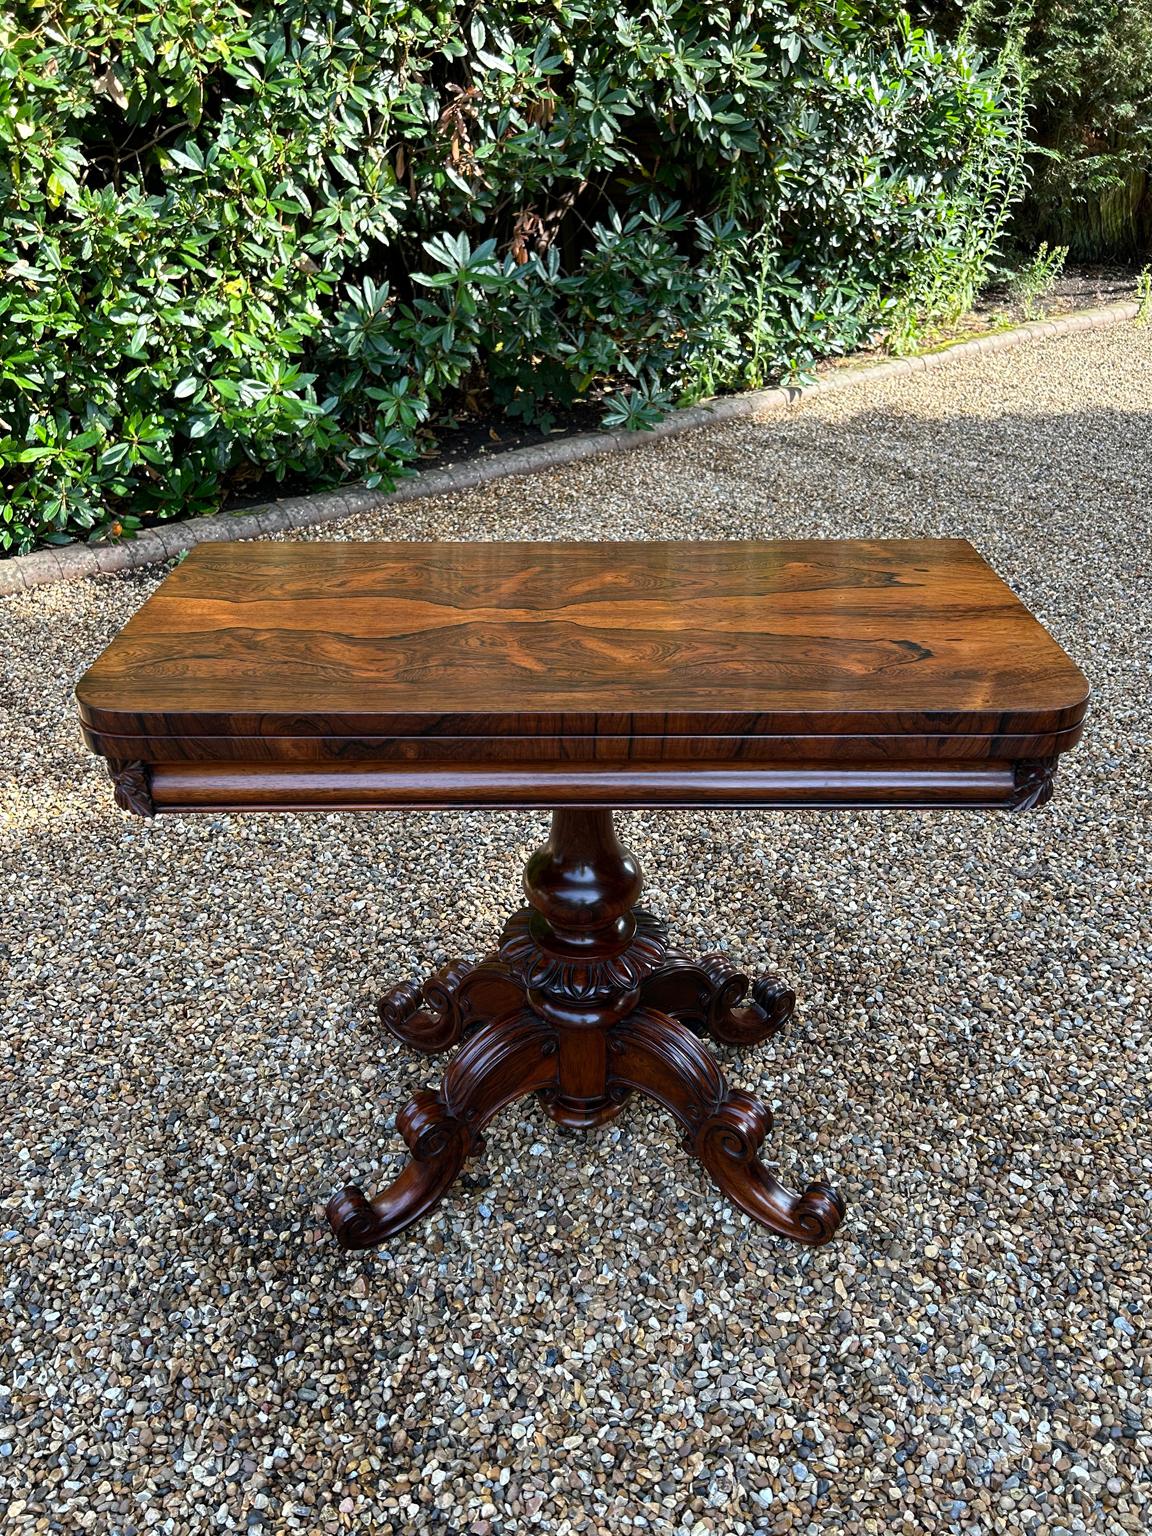 A very high quality 19th Century William IV Rosewood Card Table with baize interior. With turned and carved column support, four well carved scroll and shaped cabriole legs with original castors. The top rotates by 90 degrees and unfolds to convert